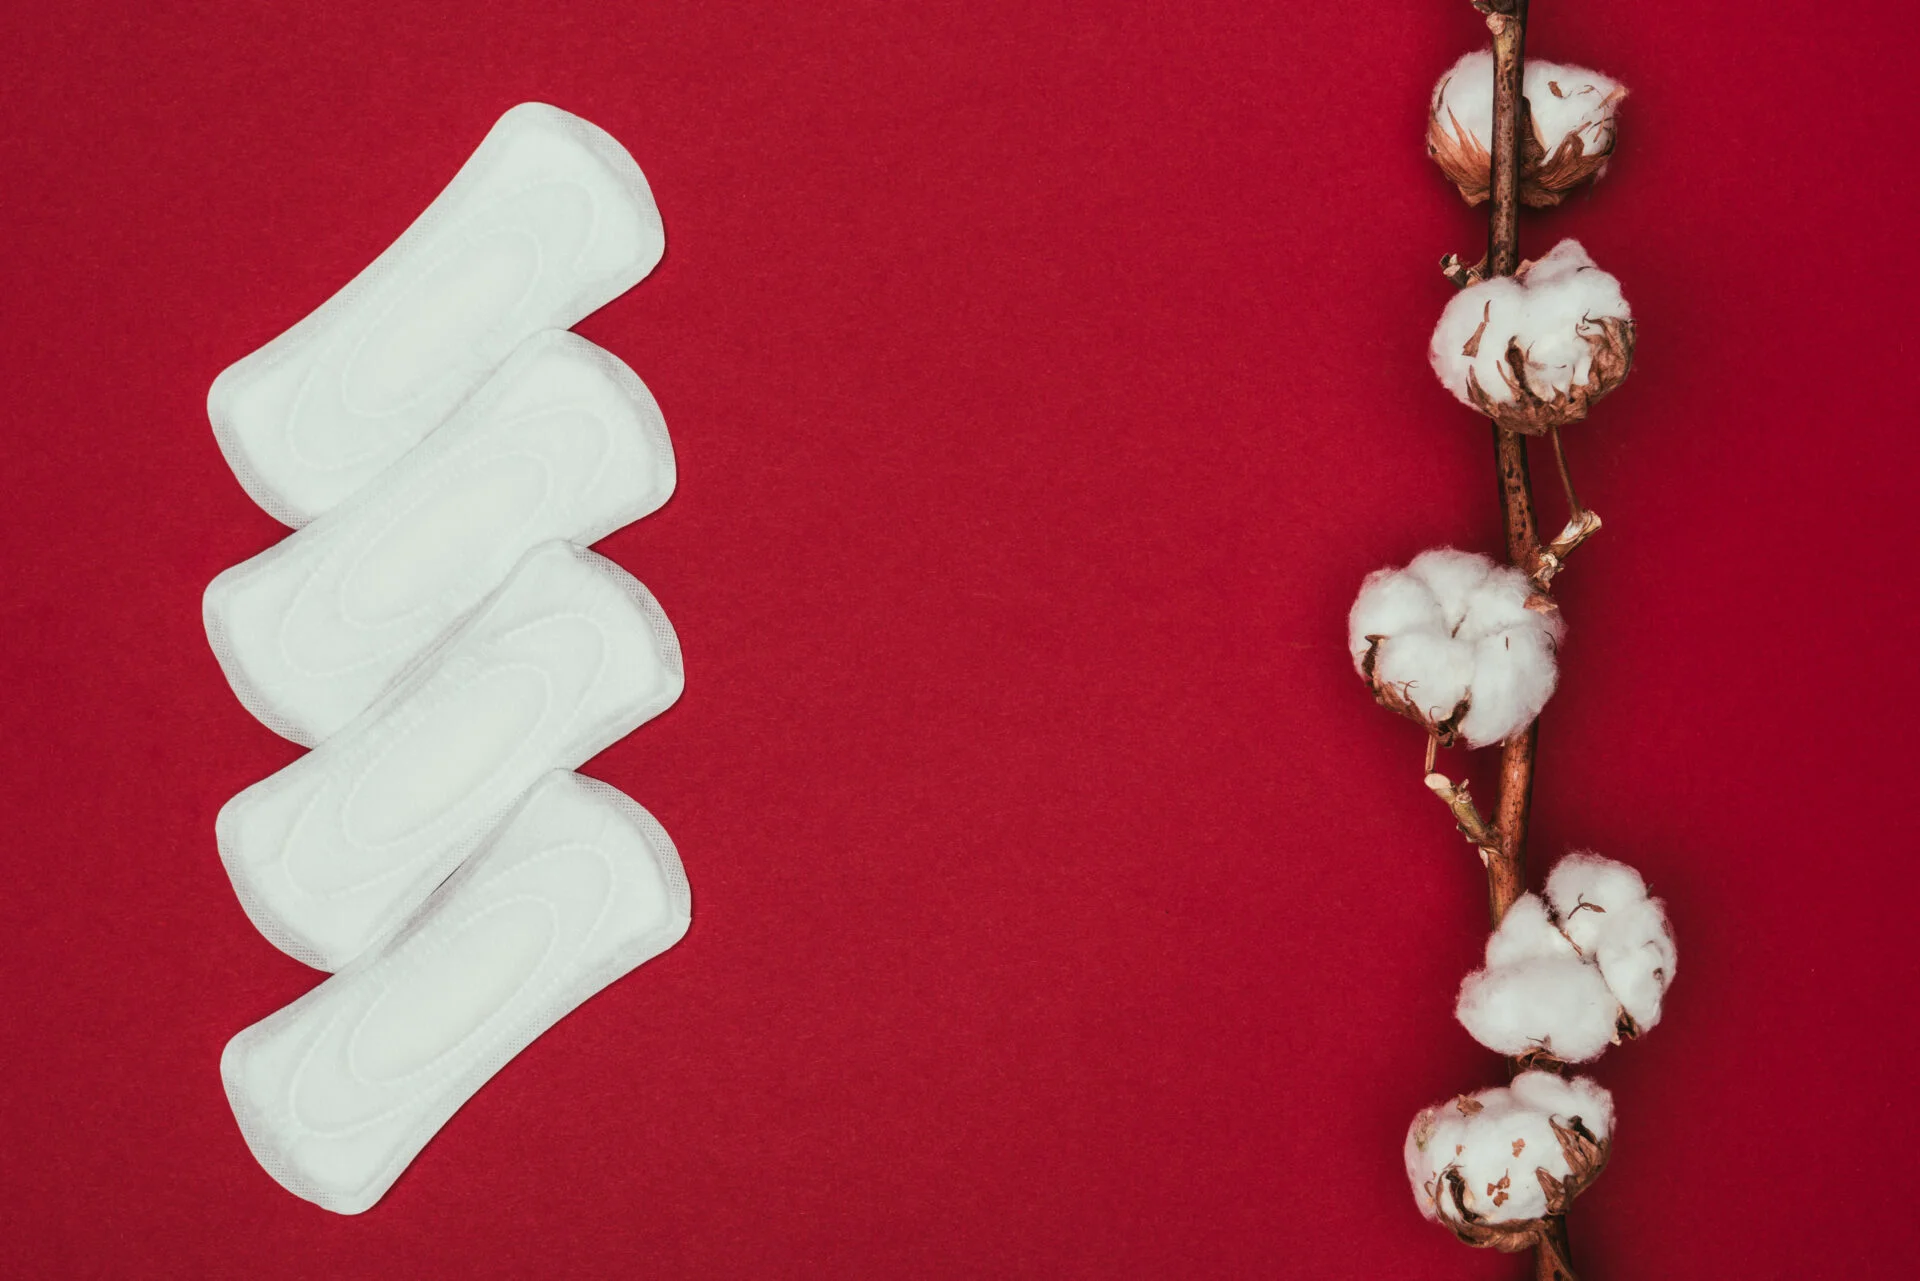 Sanitary pads in front of cotton with red background